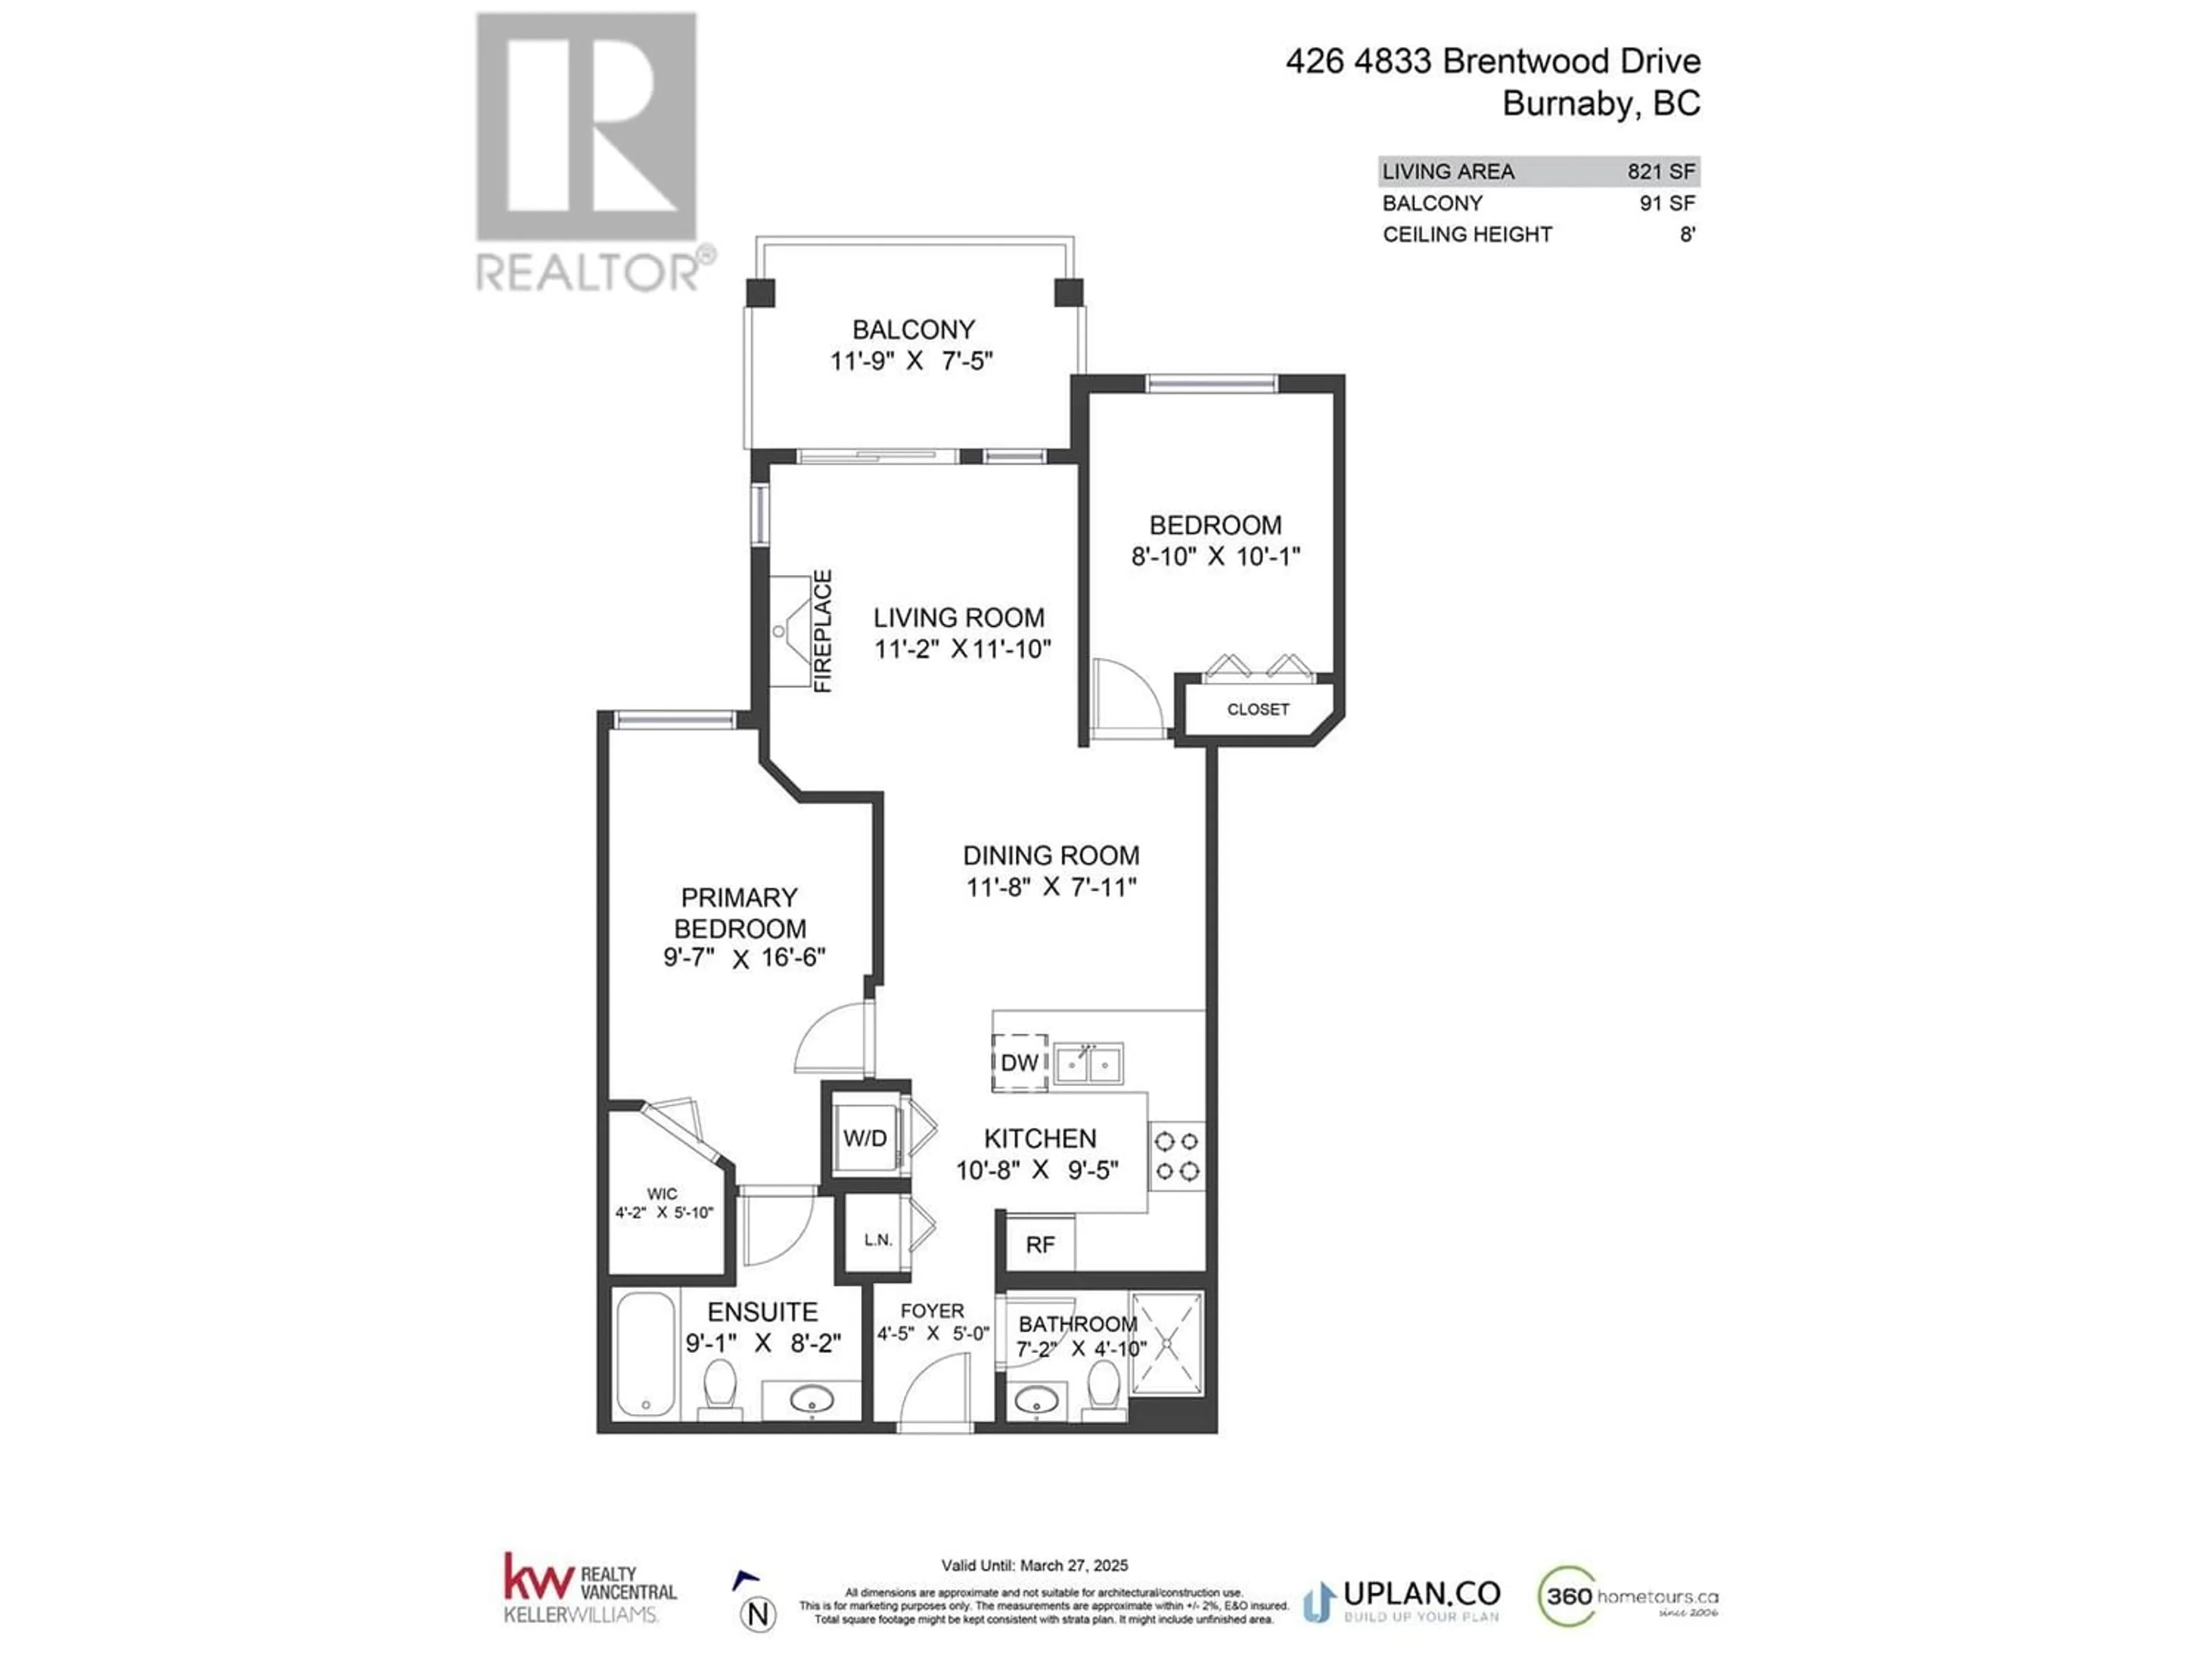 Floor plan for 426 4833 BRENTWOOD DRIVE, Burnaby British Columbia V5C0C3